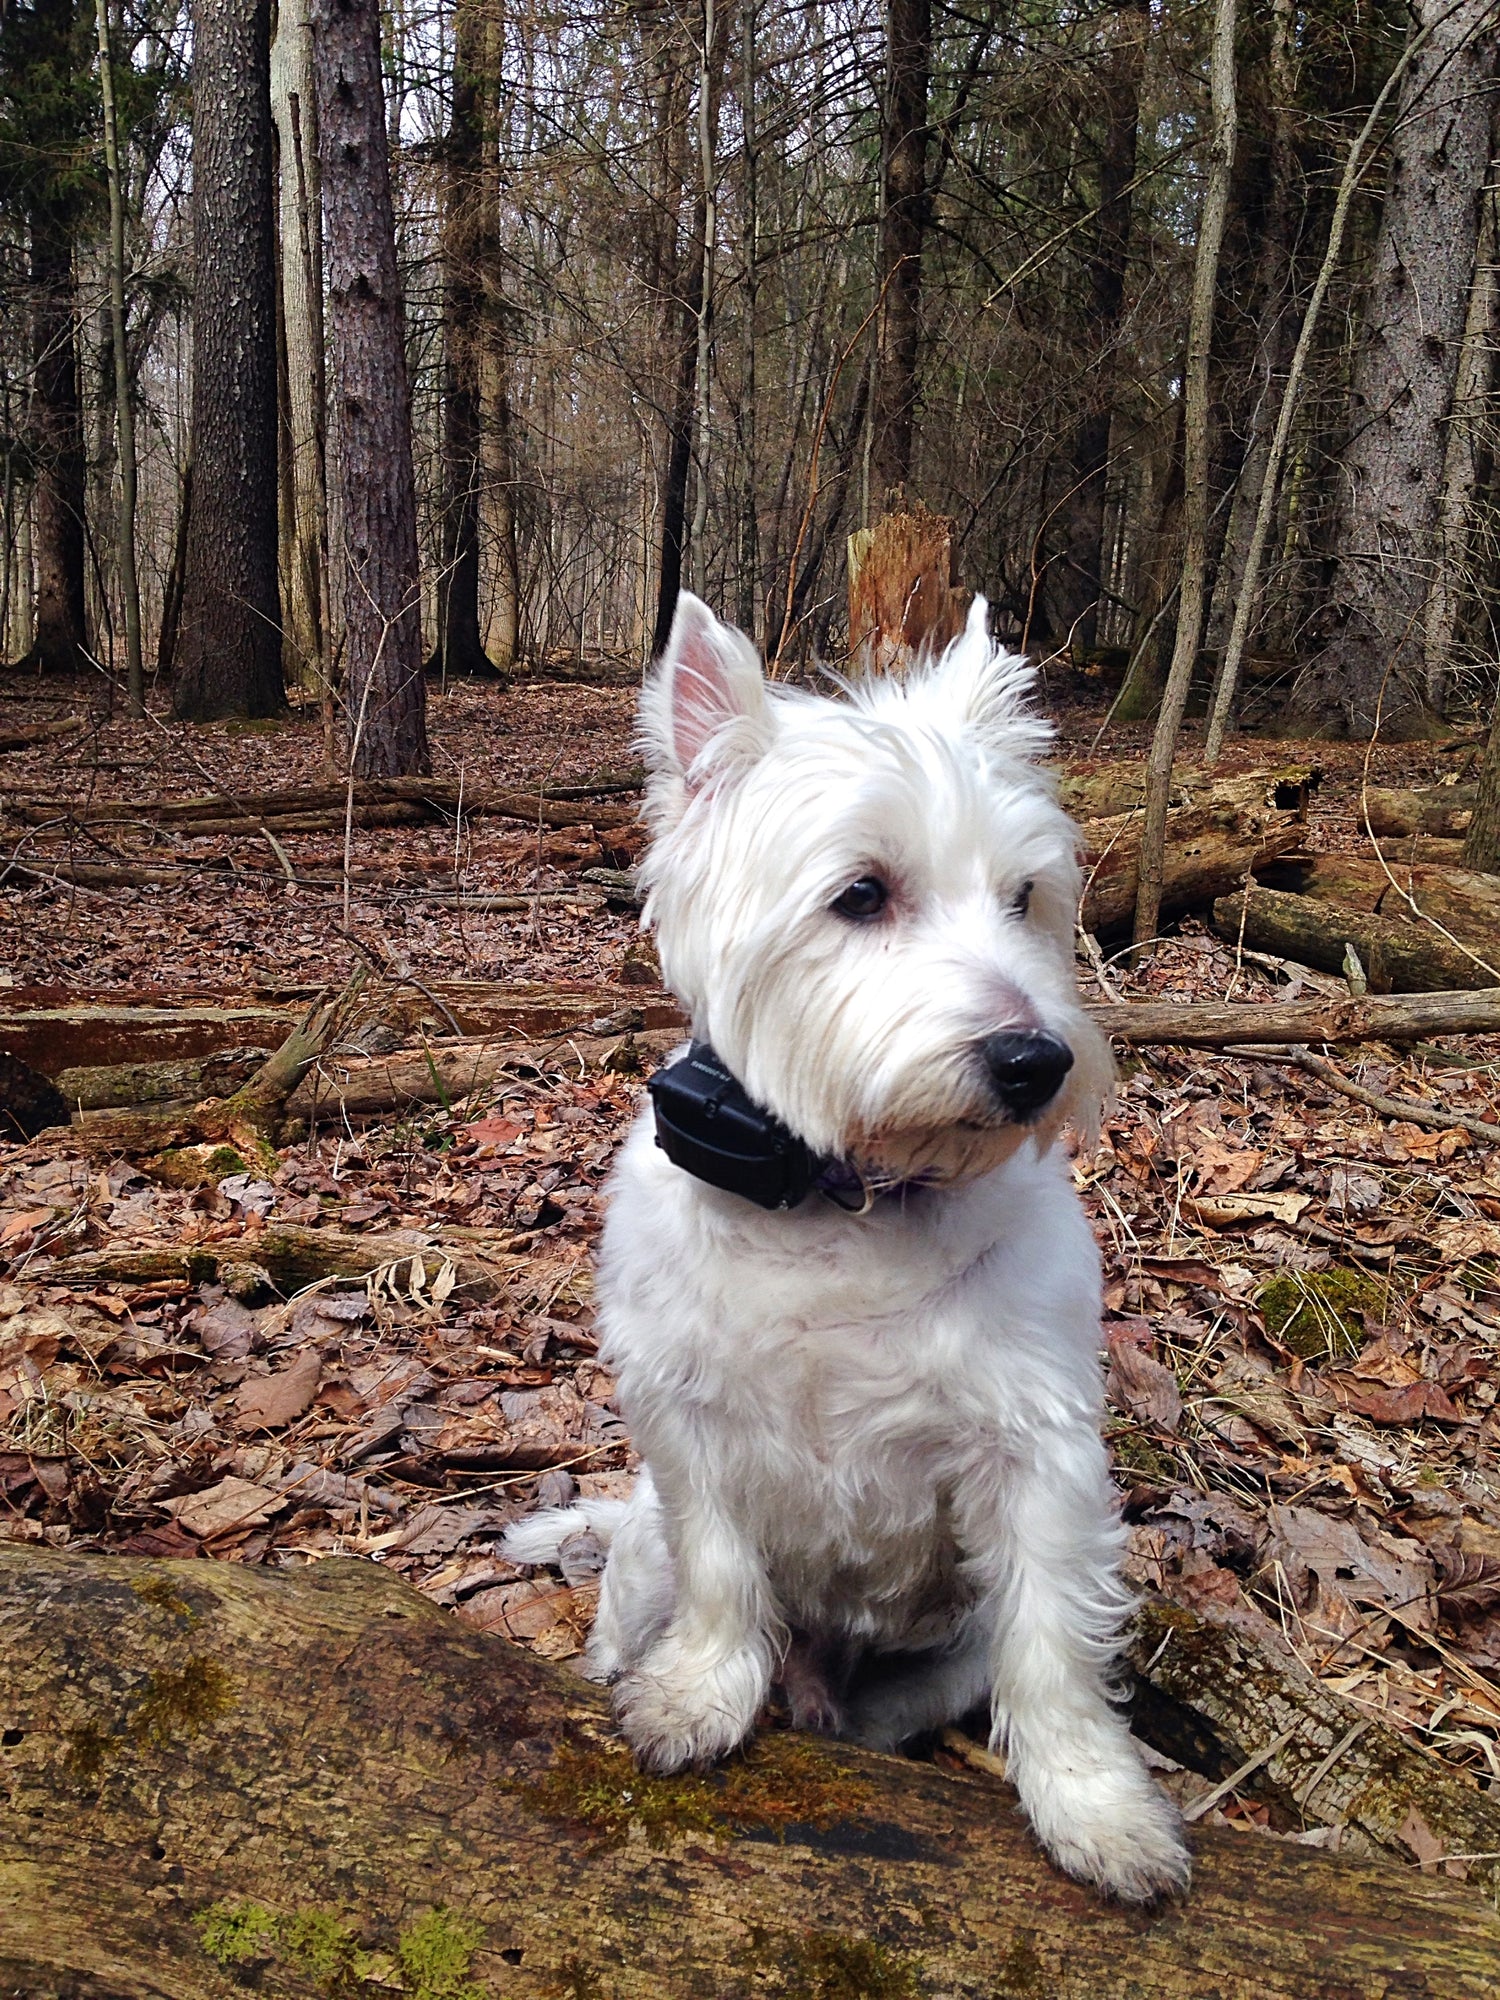 Skip the Westhighland White Terrier, label model, and adventure dog.